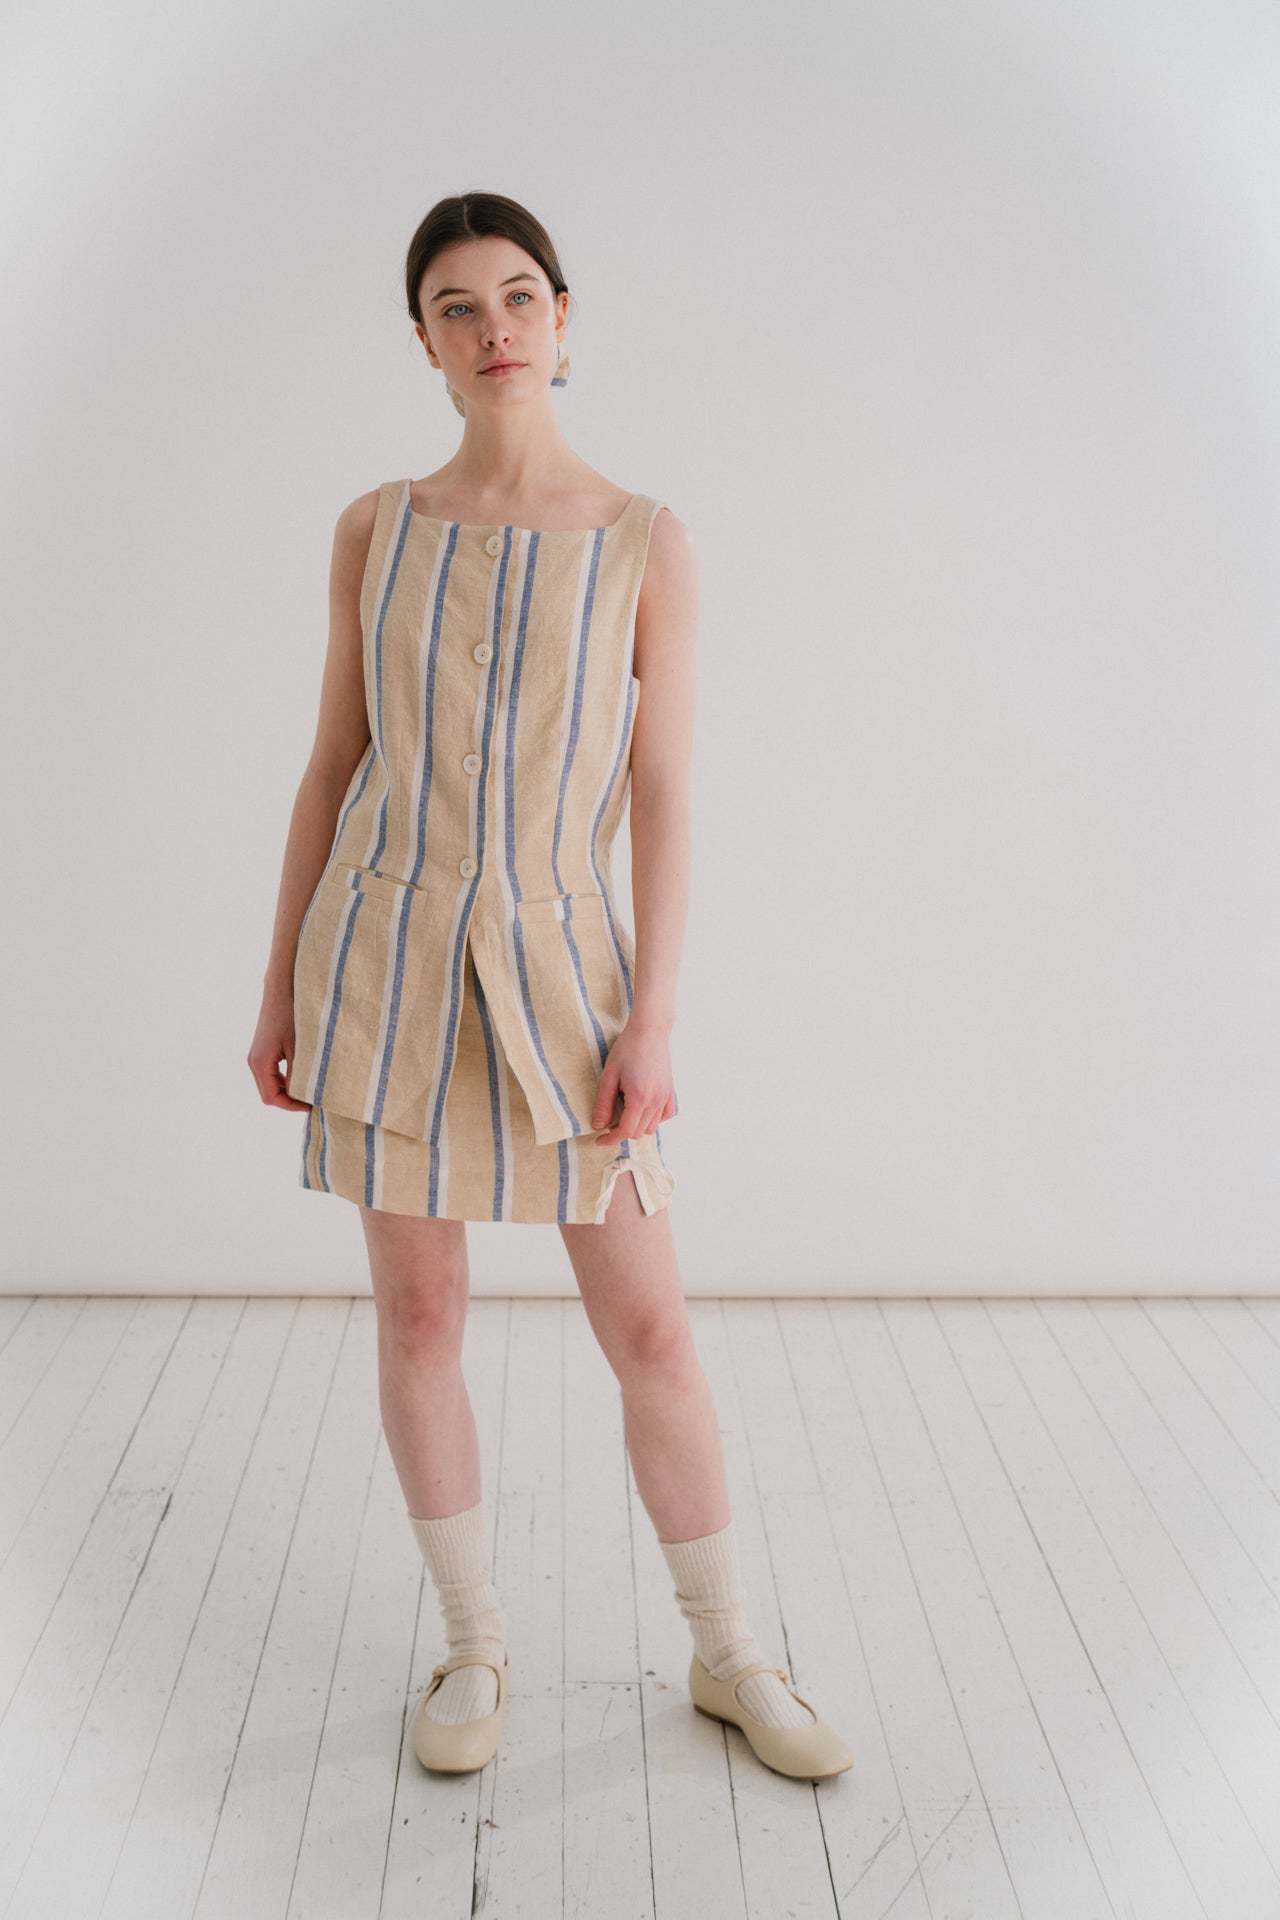 THE MIA MINI - STRIPE | Our very first mini - the Mia skirt has been designed to be the throw on piece that you will continue to reach for this Summer. A delicate bow detail on the front right gives it a little something special. Flat waistband at the fro